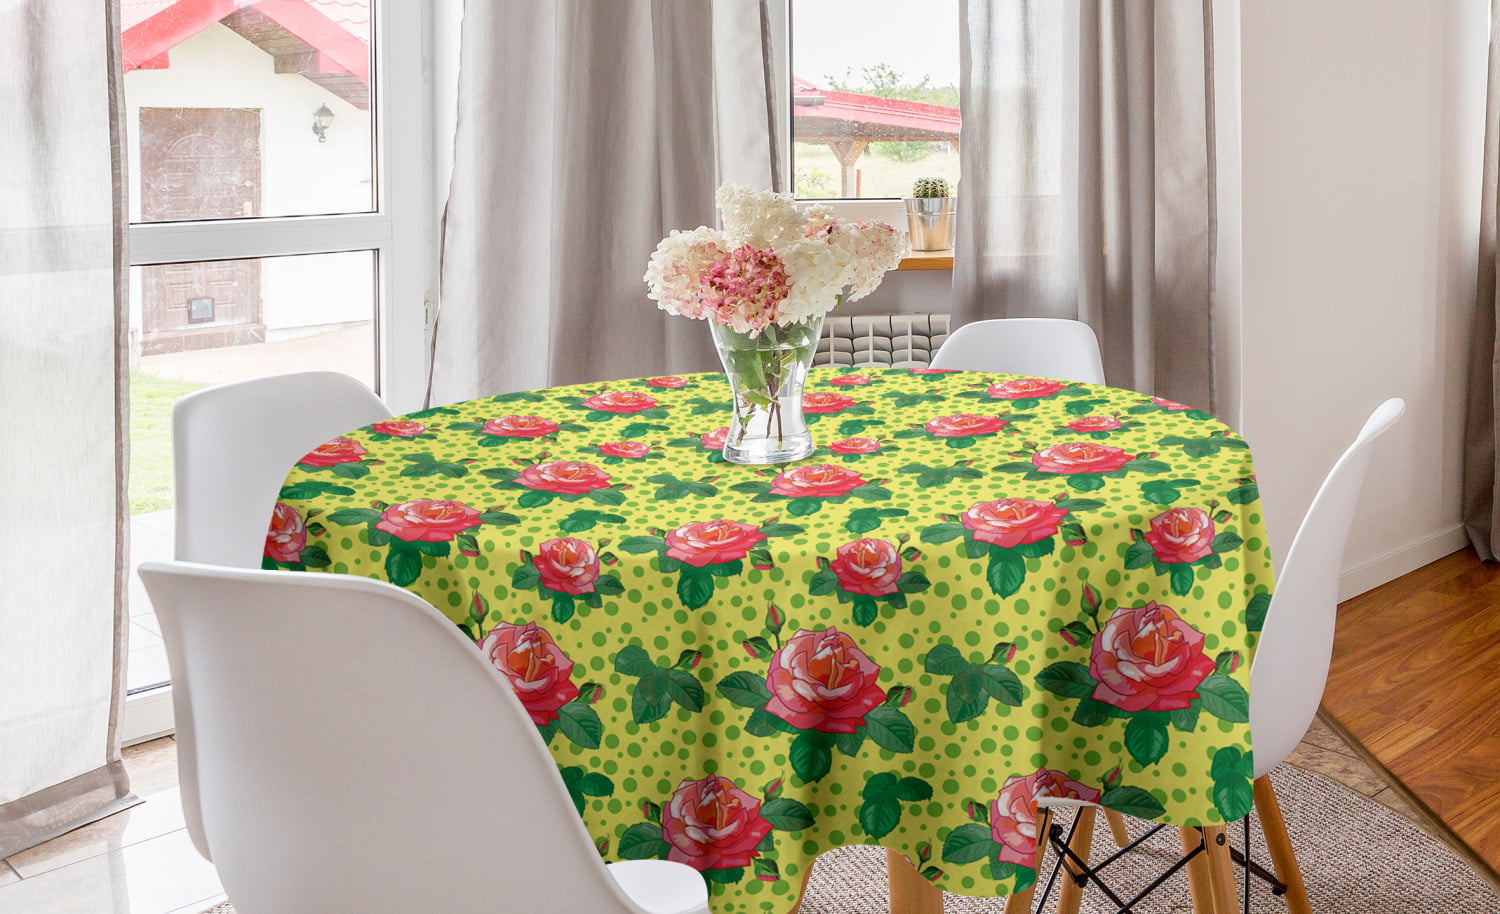 Forest Green Dark Coral Rectangular Table Cover for Dining Room Kitchen Decor Vintage Romance Petals Fragrance on Polka Dots Nature Classic Ambesonne Rose Tablecloth 60 X 84